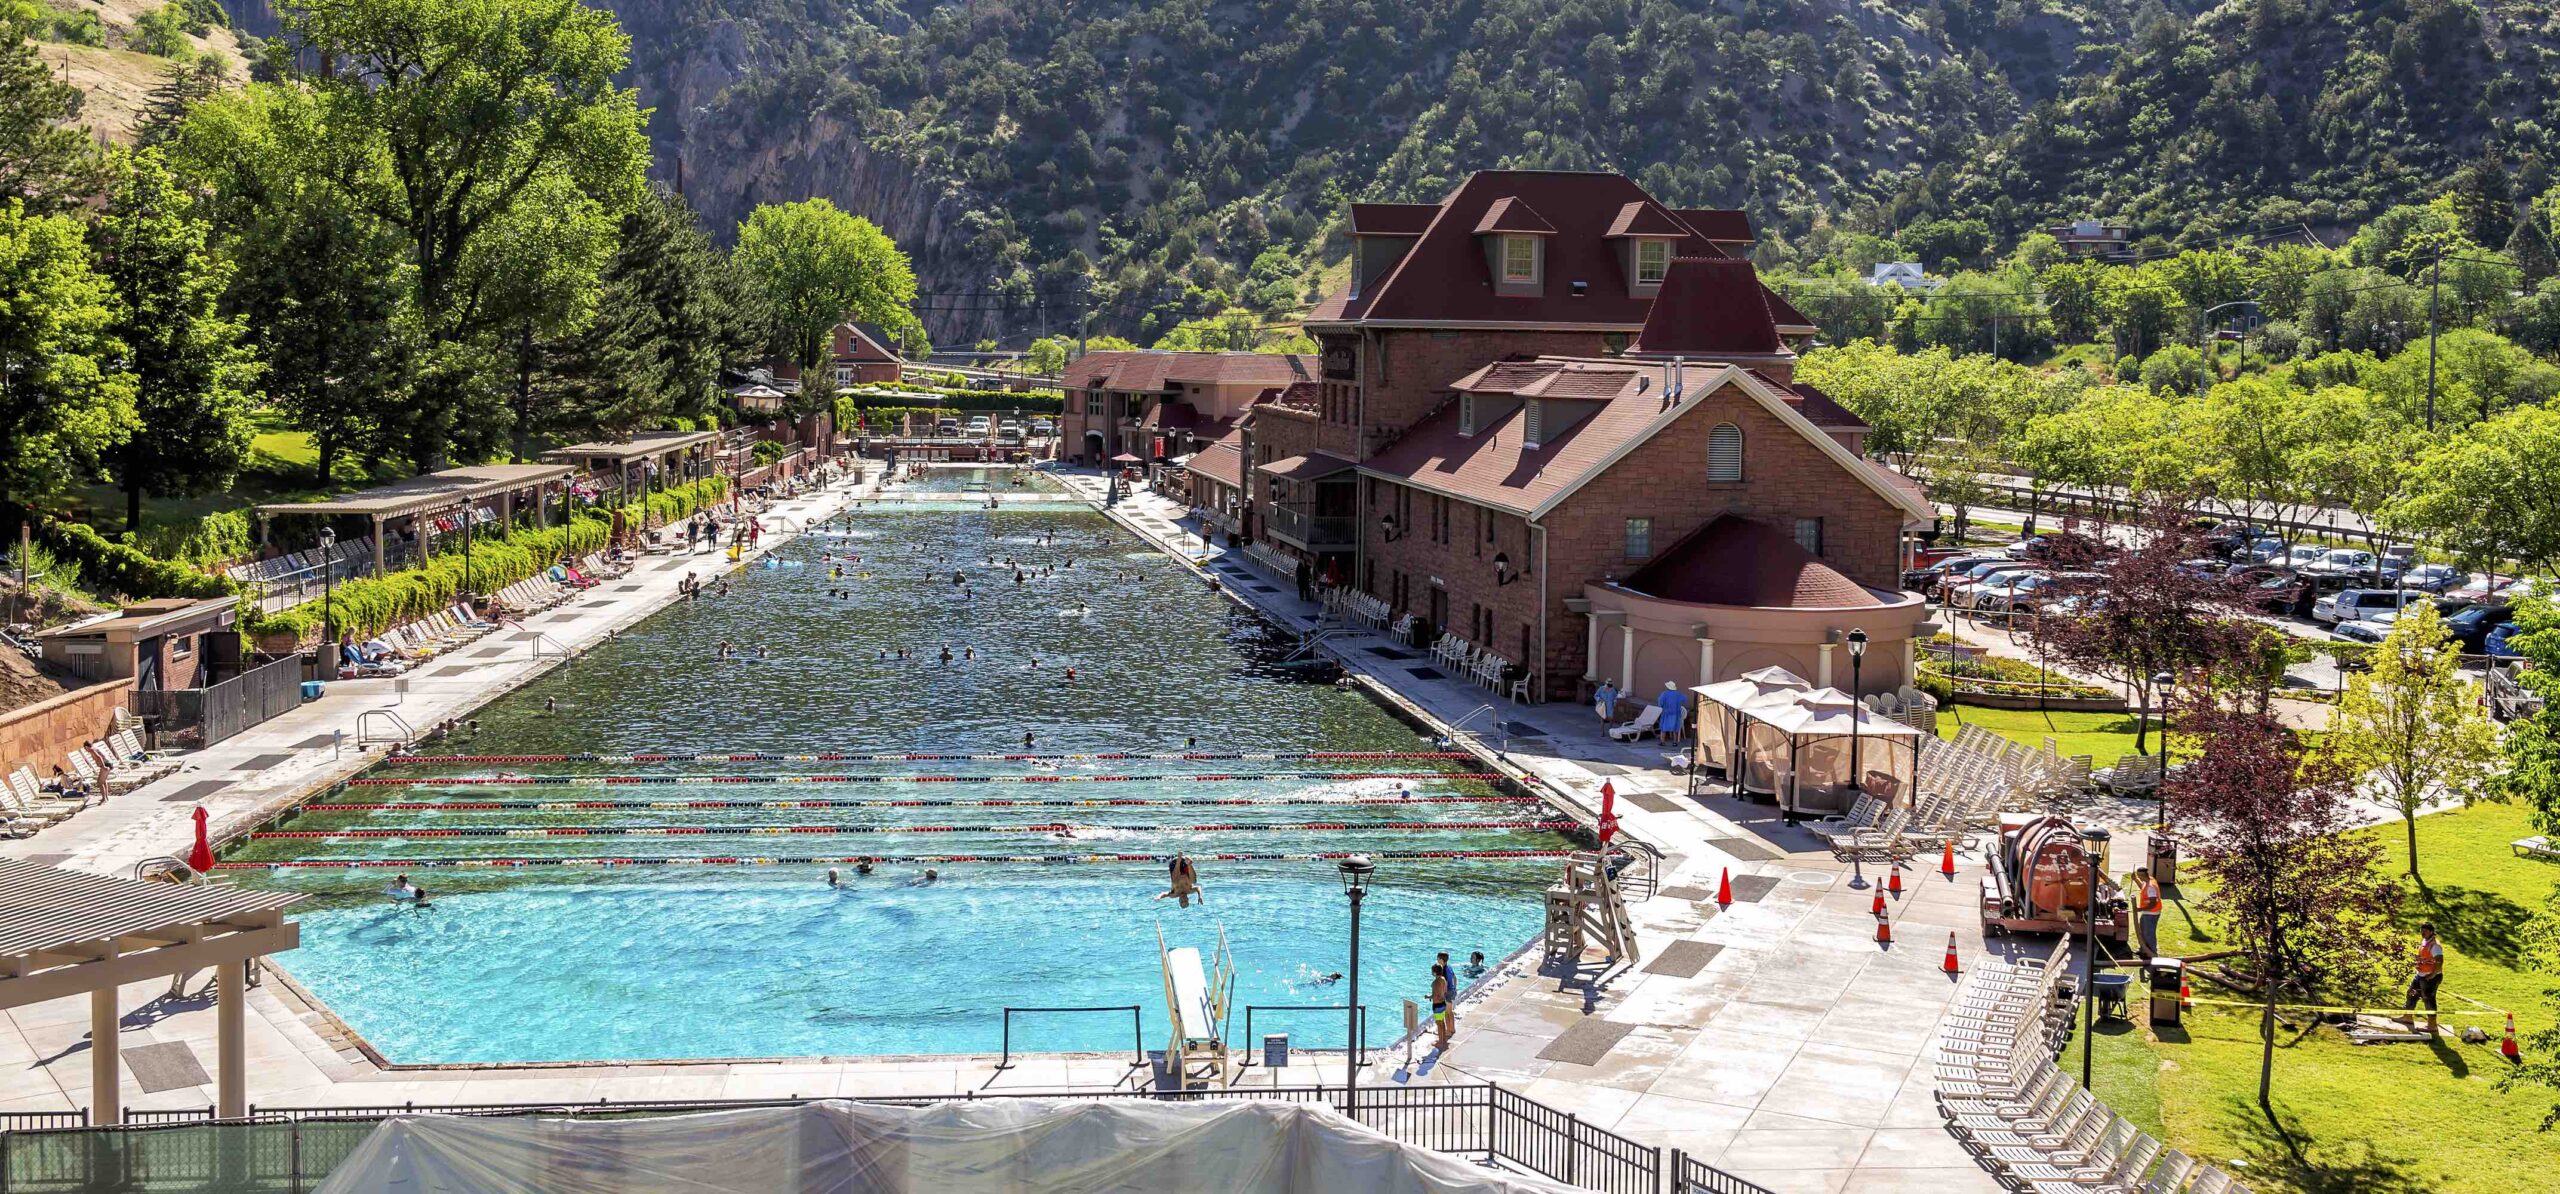 This photo captures the serene charm of Glenwood Hot Springs pool as seen from the pedestrian bridge in Glenwood Springs during the day. In the backdrop, the green mountains with scattered dirt patches add a rustic touch to the natural beauty of the scene.